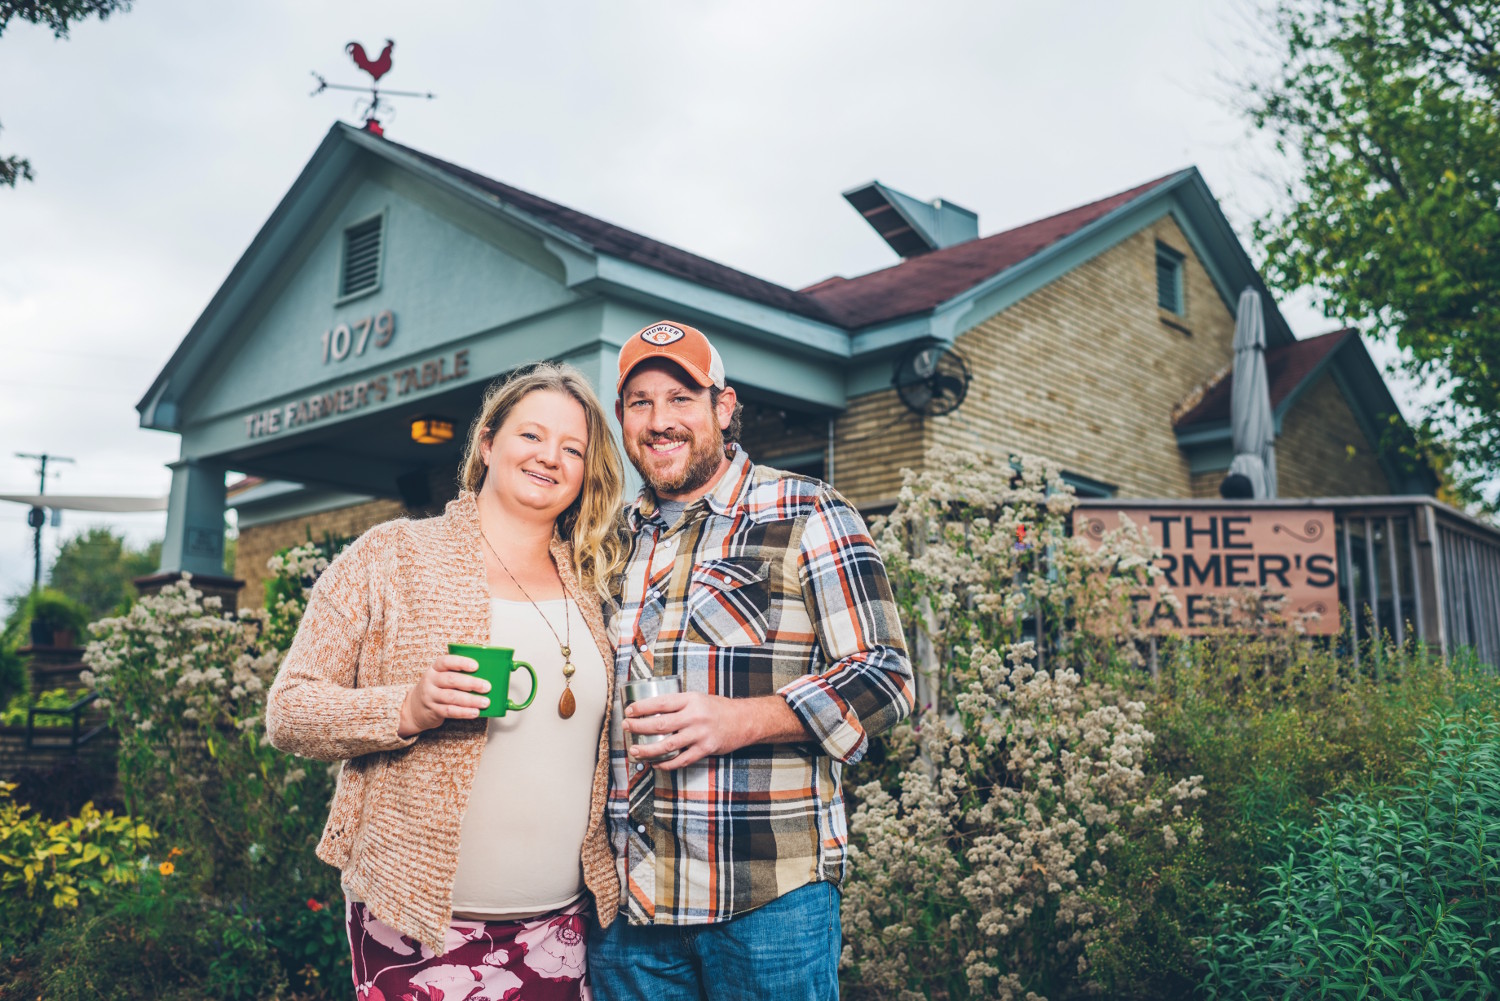 Adrienne and Rob Shaunfield are the owners of The Farmer's Table Cafe in Fayetteville.